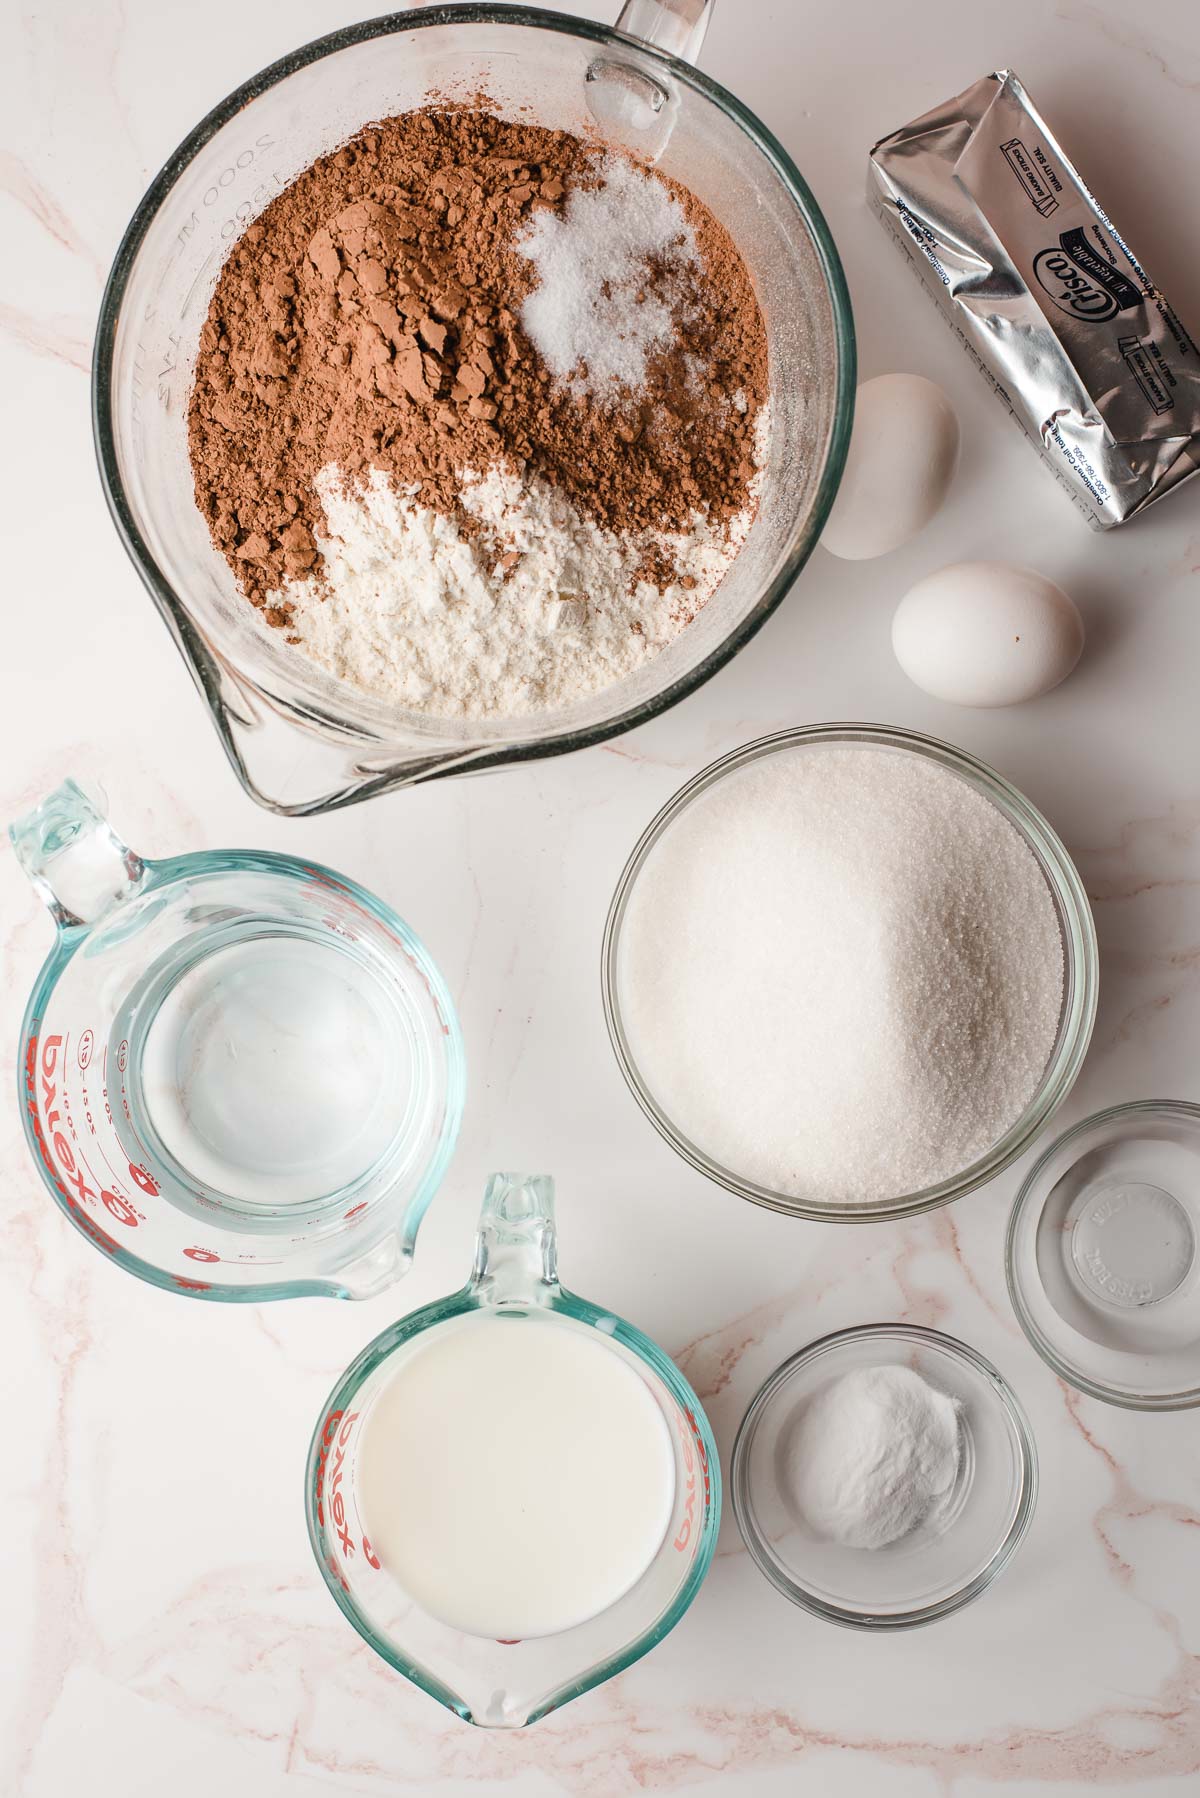 Ingredients for the chocolate whoopie pie cookies in glass bowls.